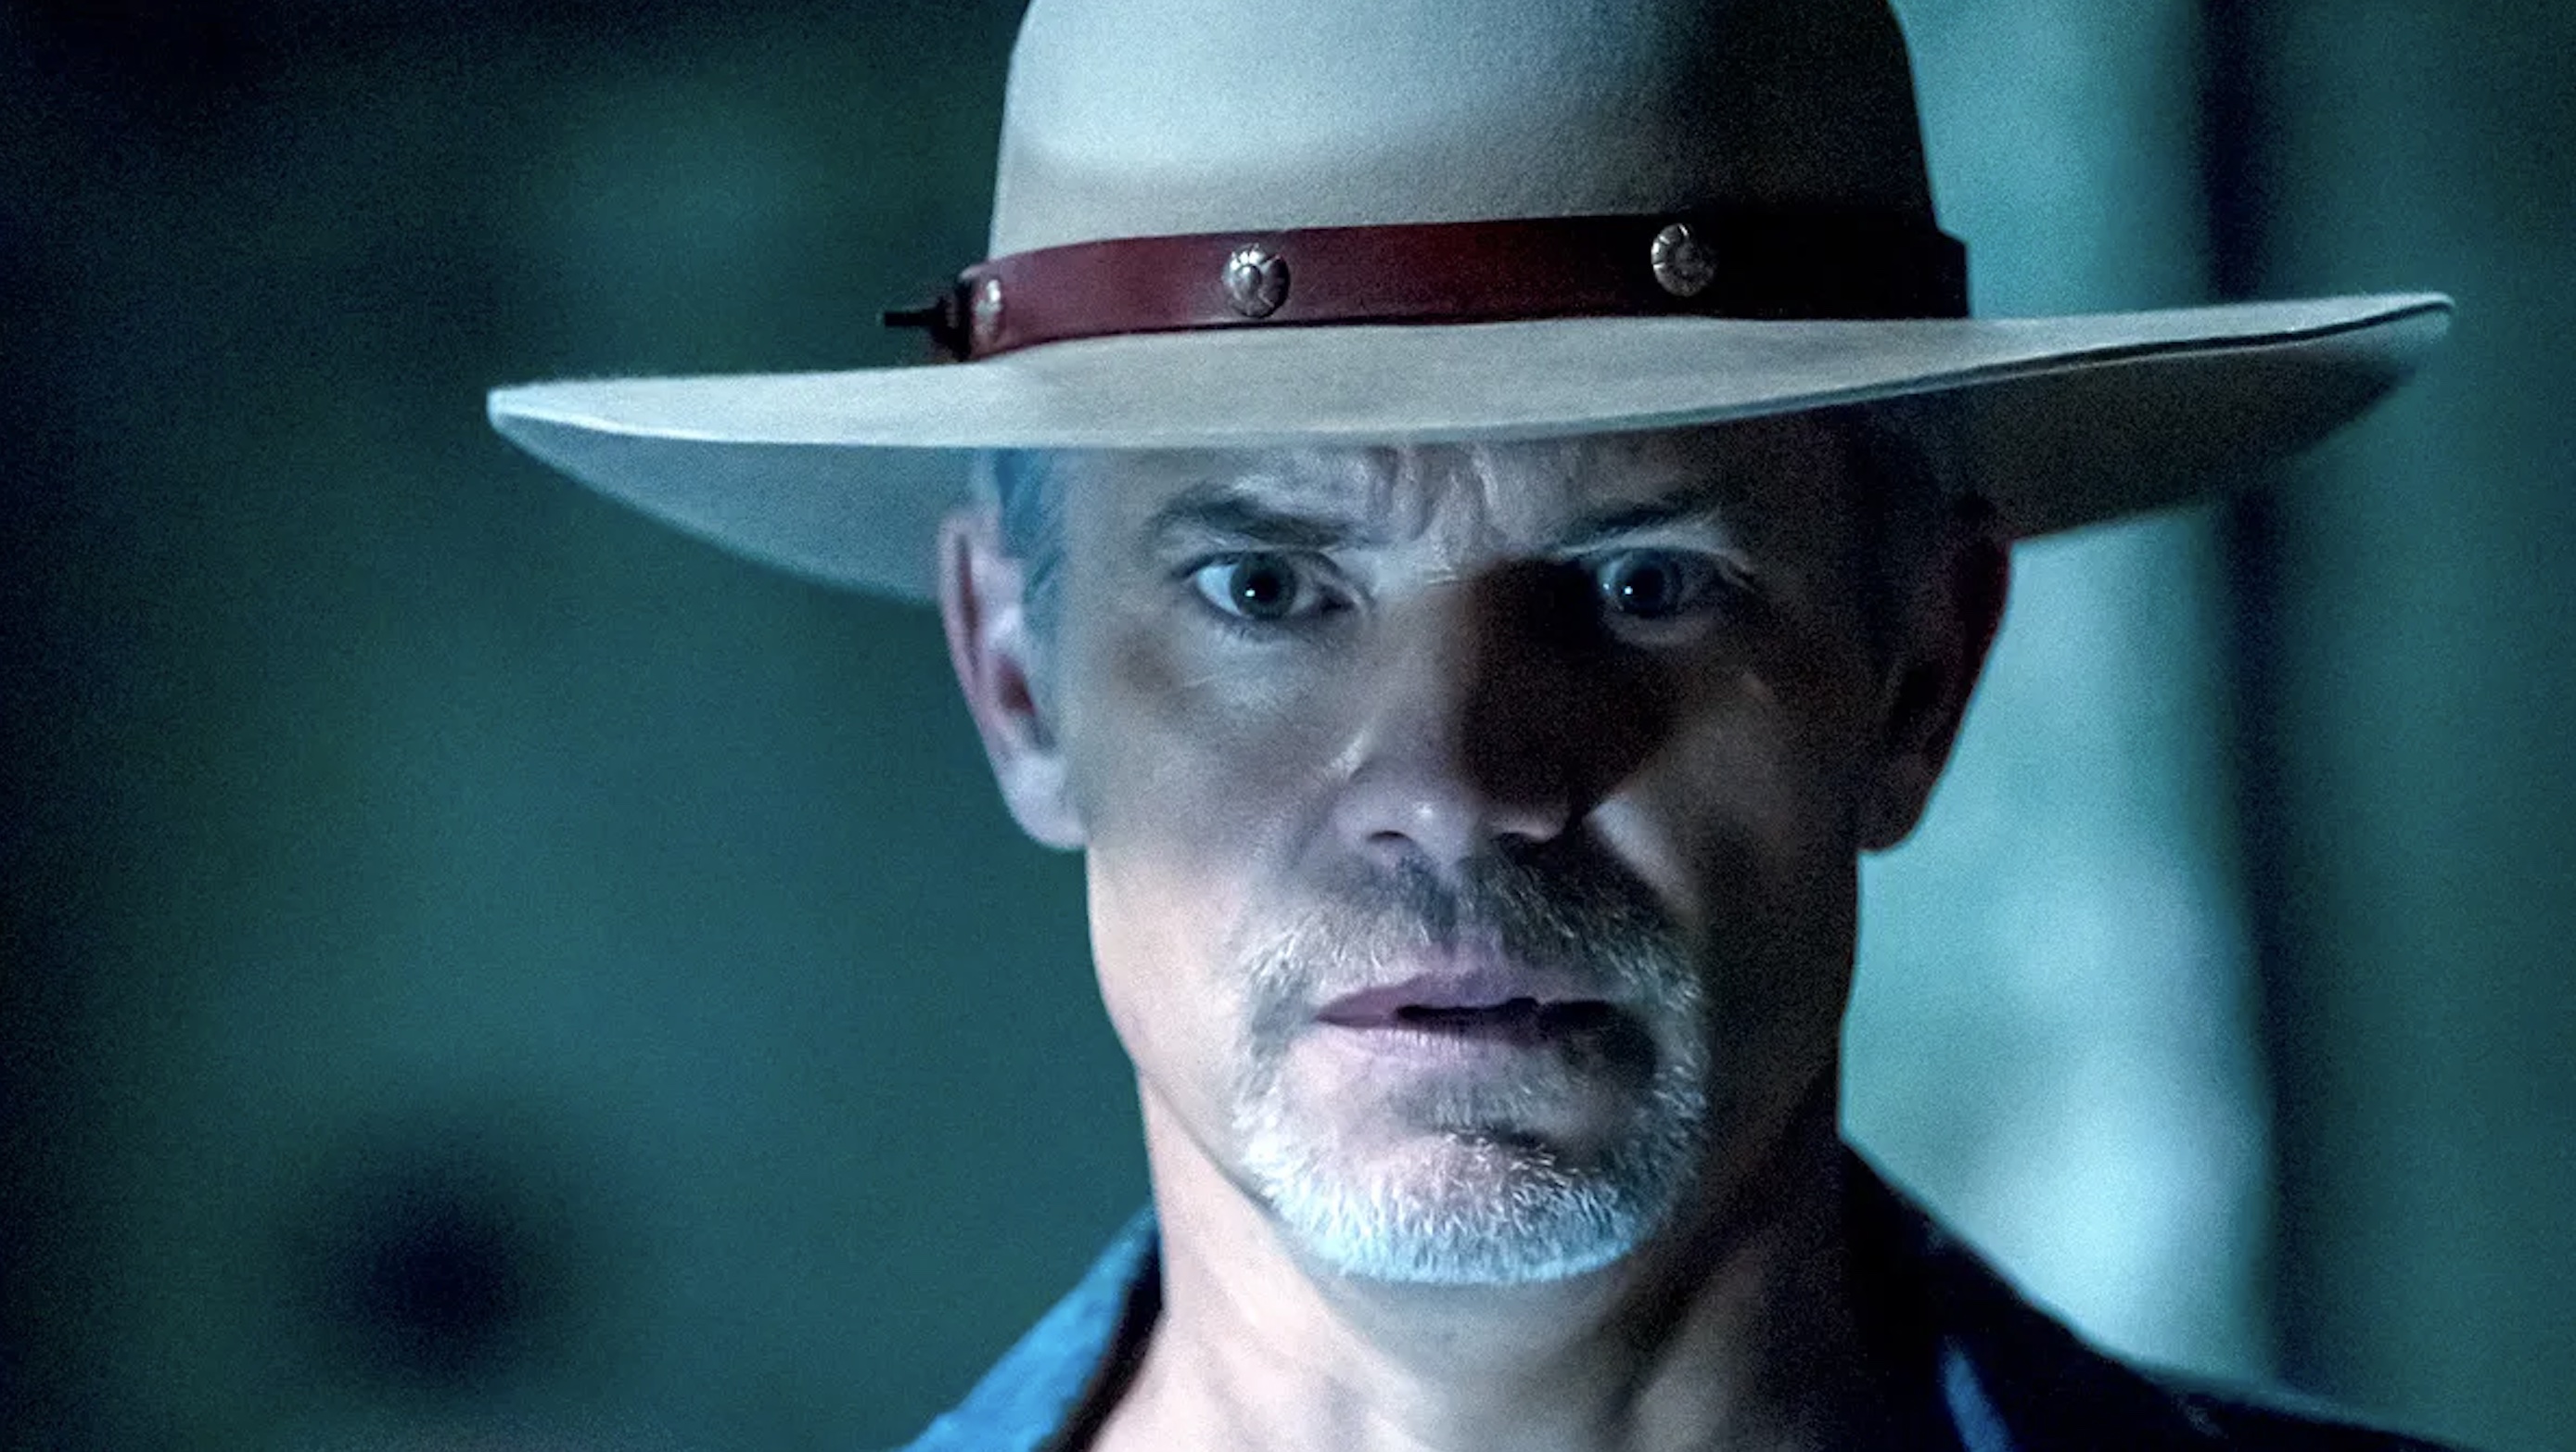 Justified: City Primeval Soundtrack on FX and Hulu - Every Song in Season 1, Episode 8